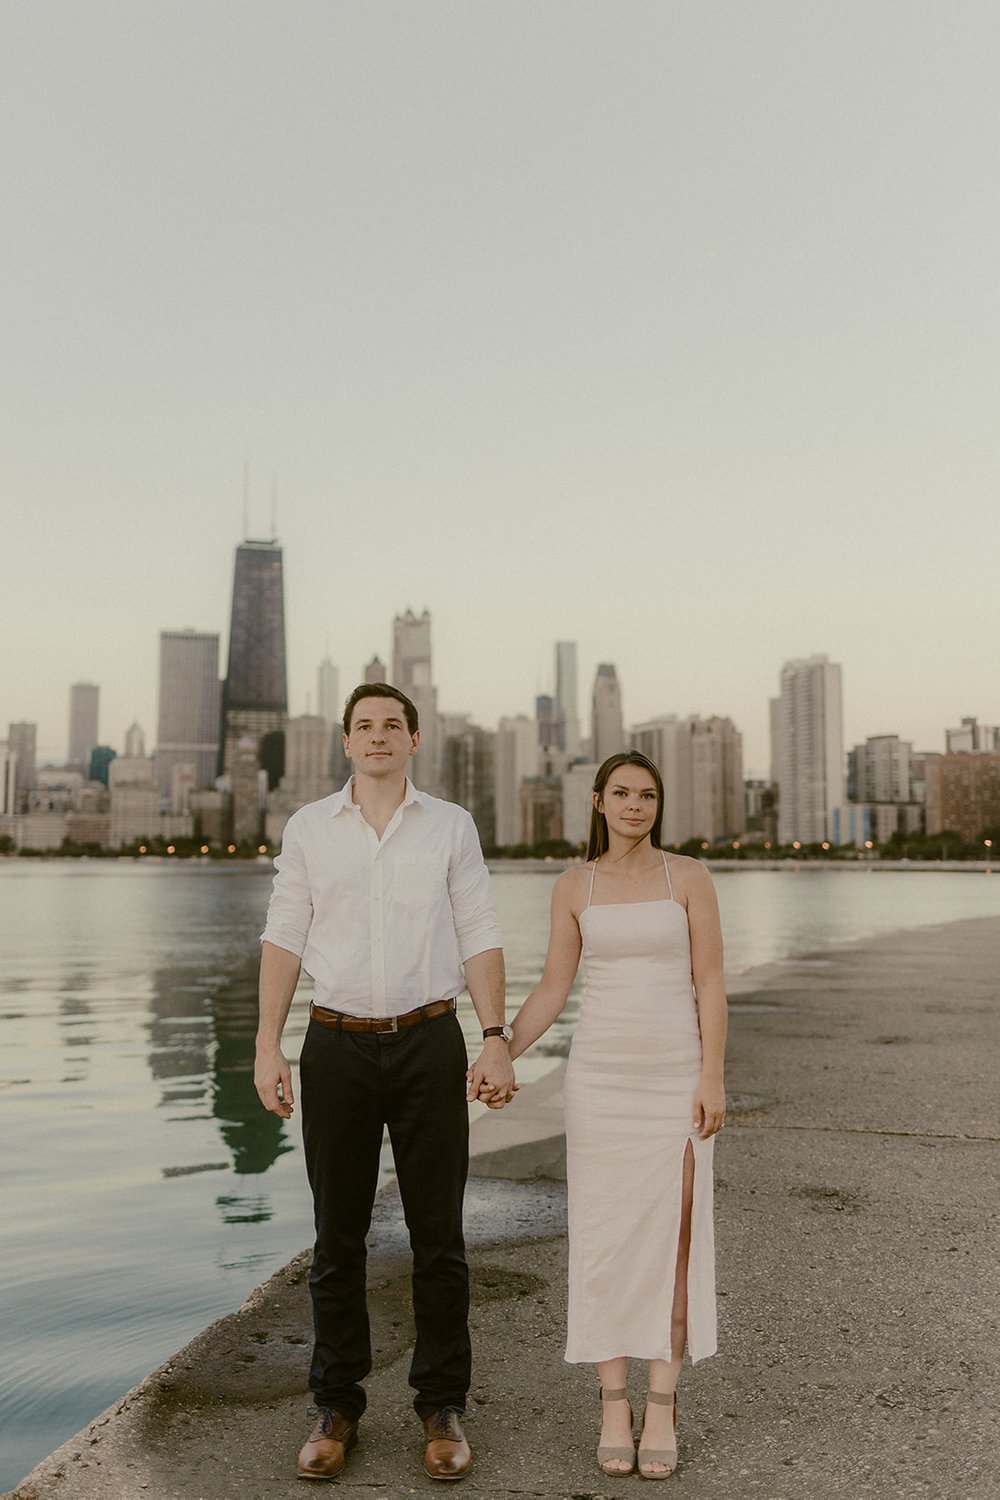 RYAN-KATHLEEN-ENGAGEMENT-SESSION-CHICAGO-ILLINOIS-THE-GERNANDS-PHOTOGRAPHY.jpg932A7844.jpg